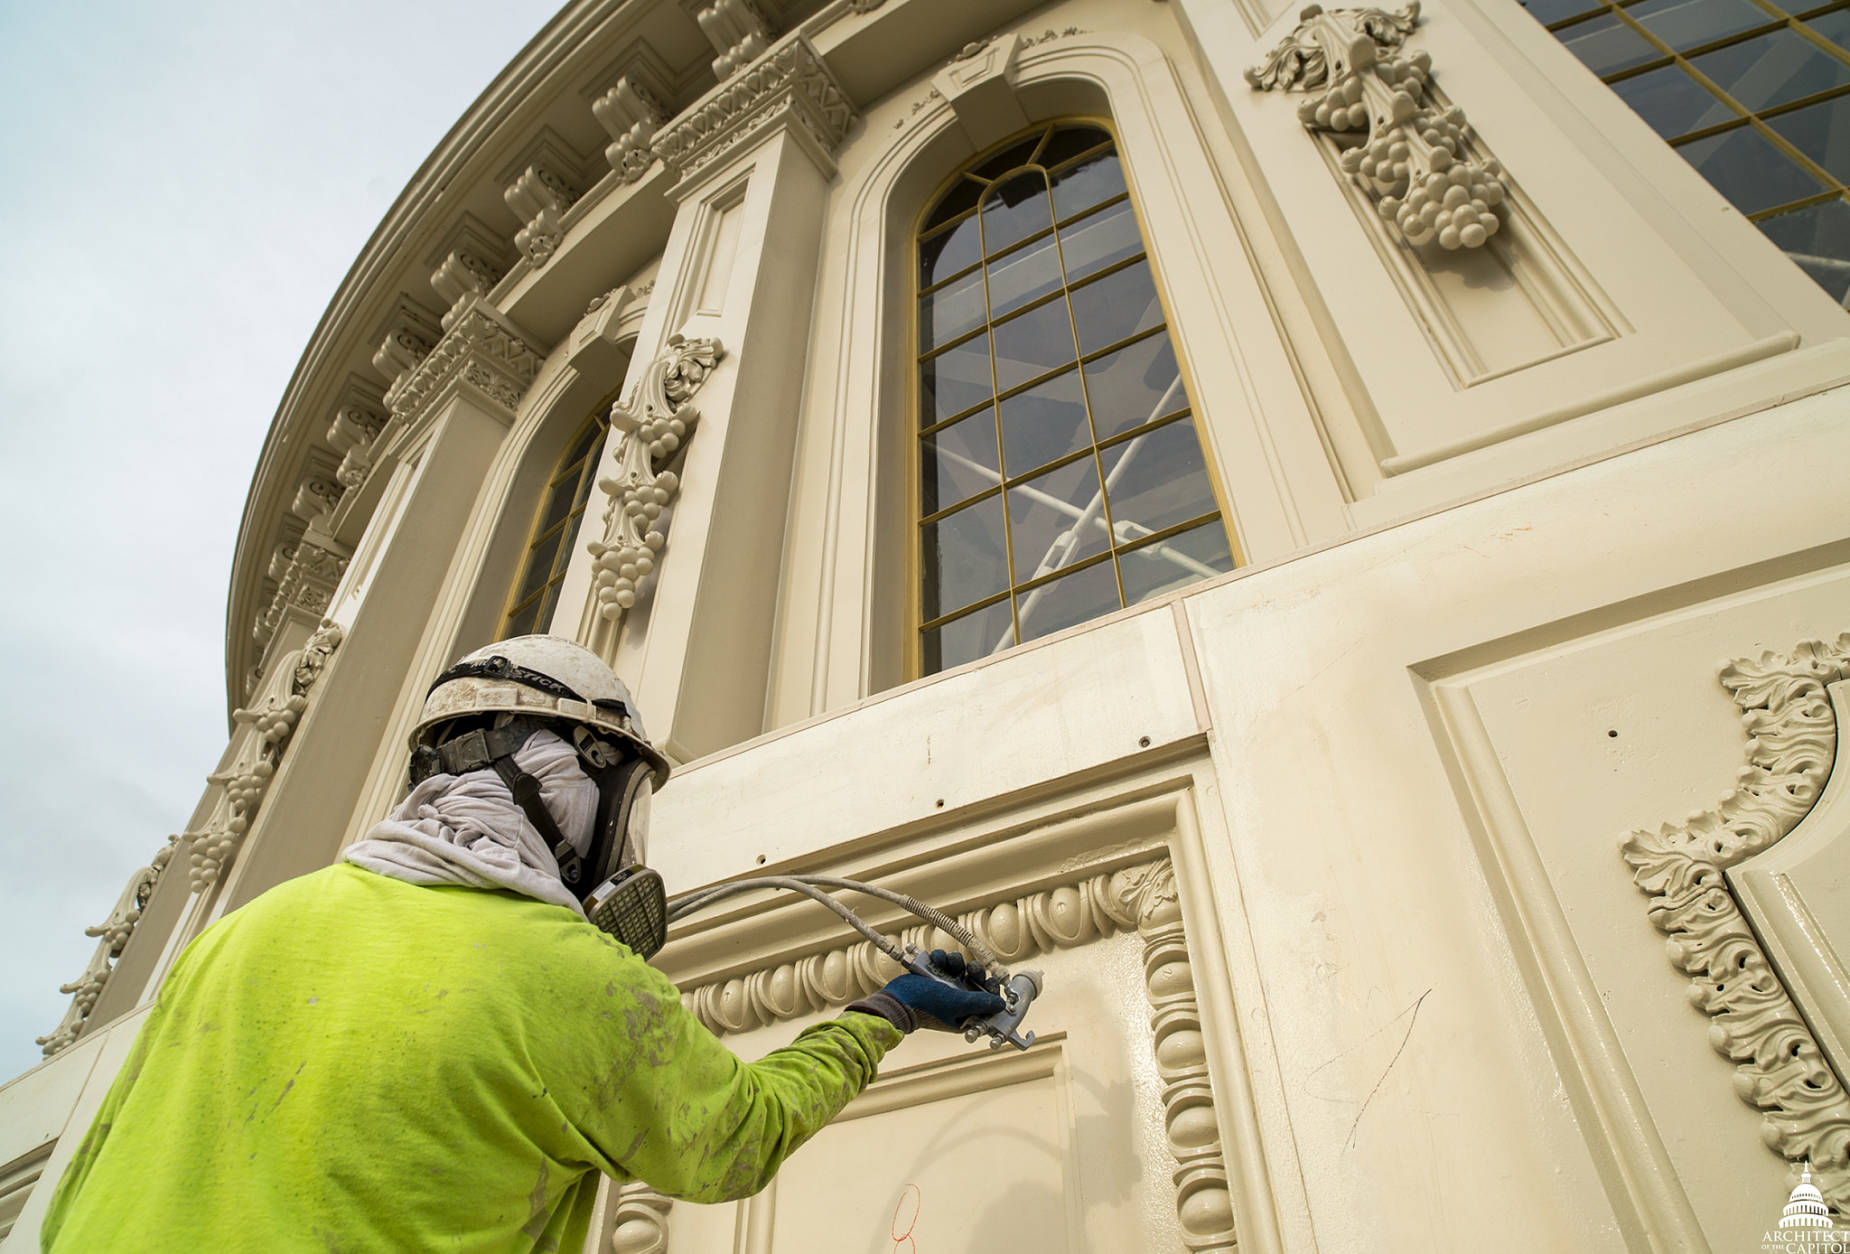 A workman applies paint to the dome of the U.S. Capitol. (Architect of the Capitol)